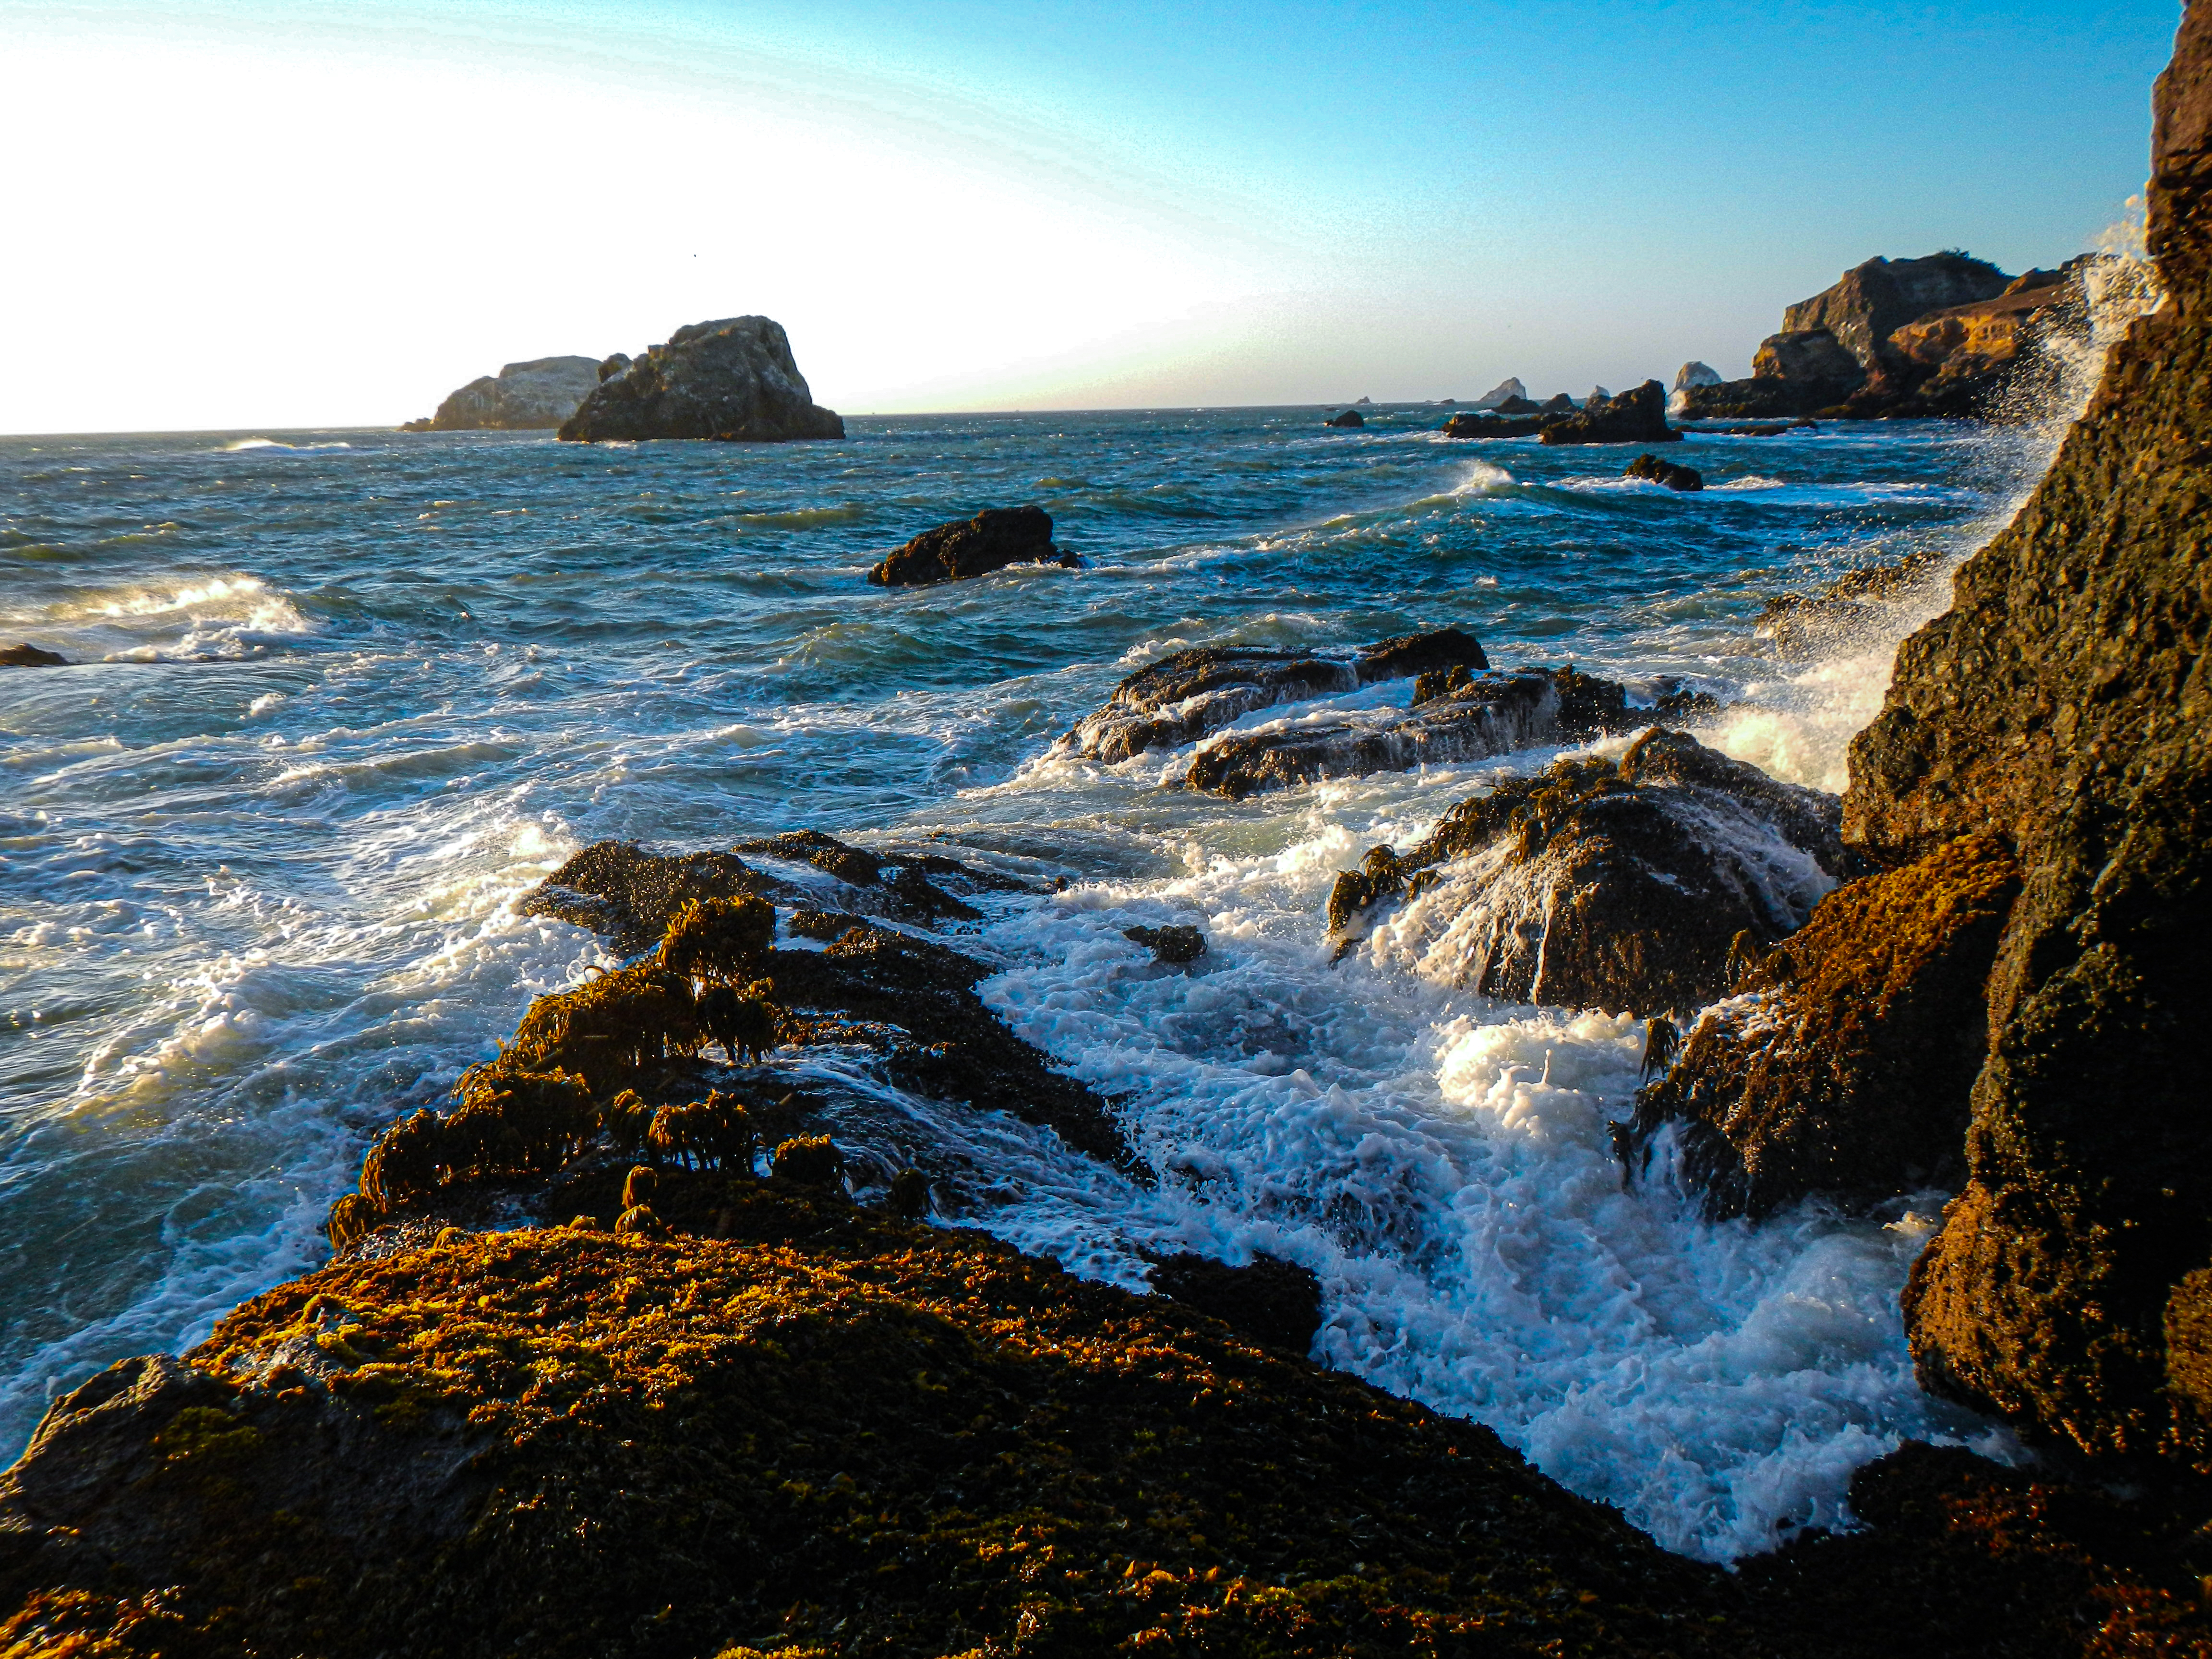 A scene of rocky coastline with waves breaking against the rough stones.